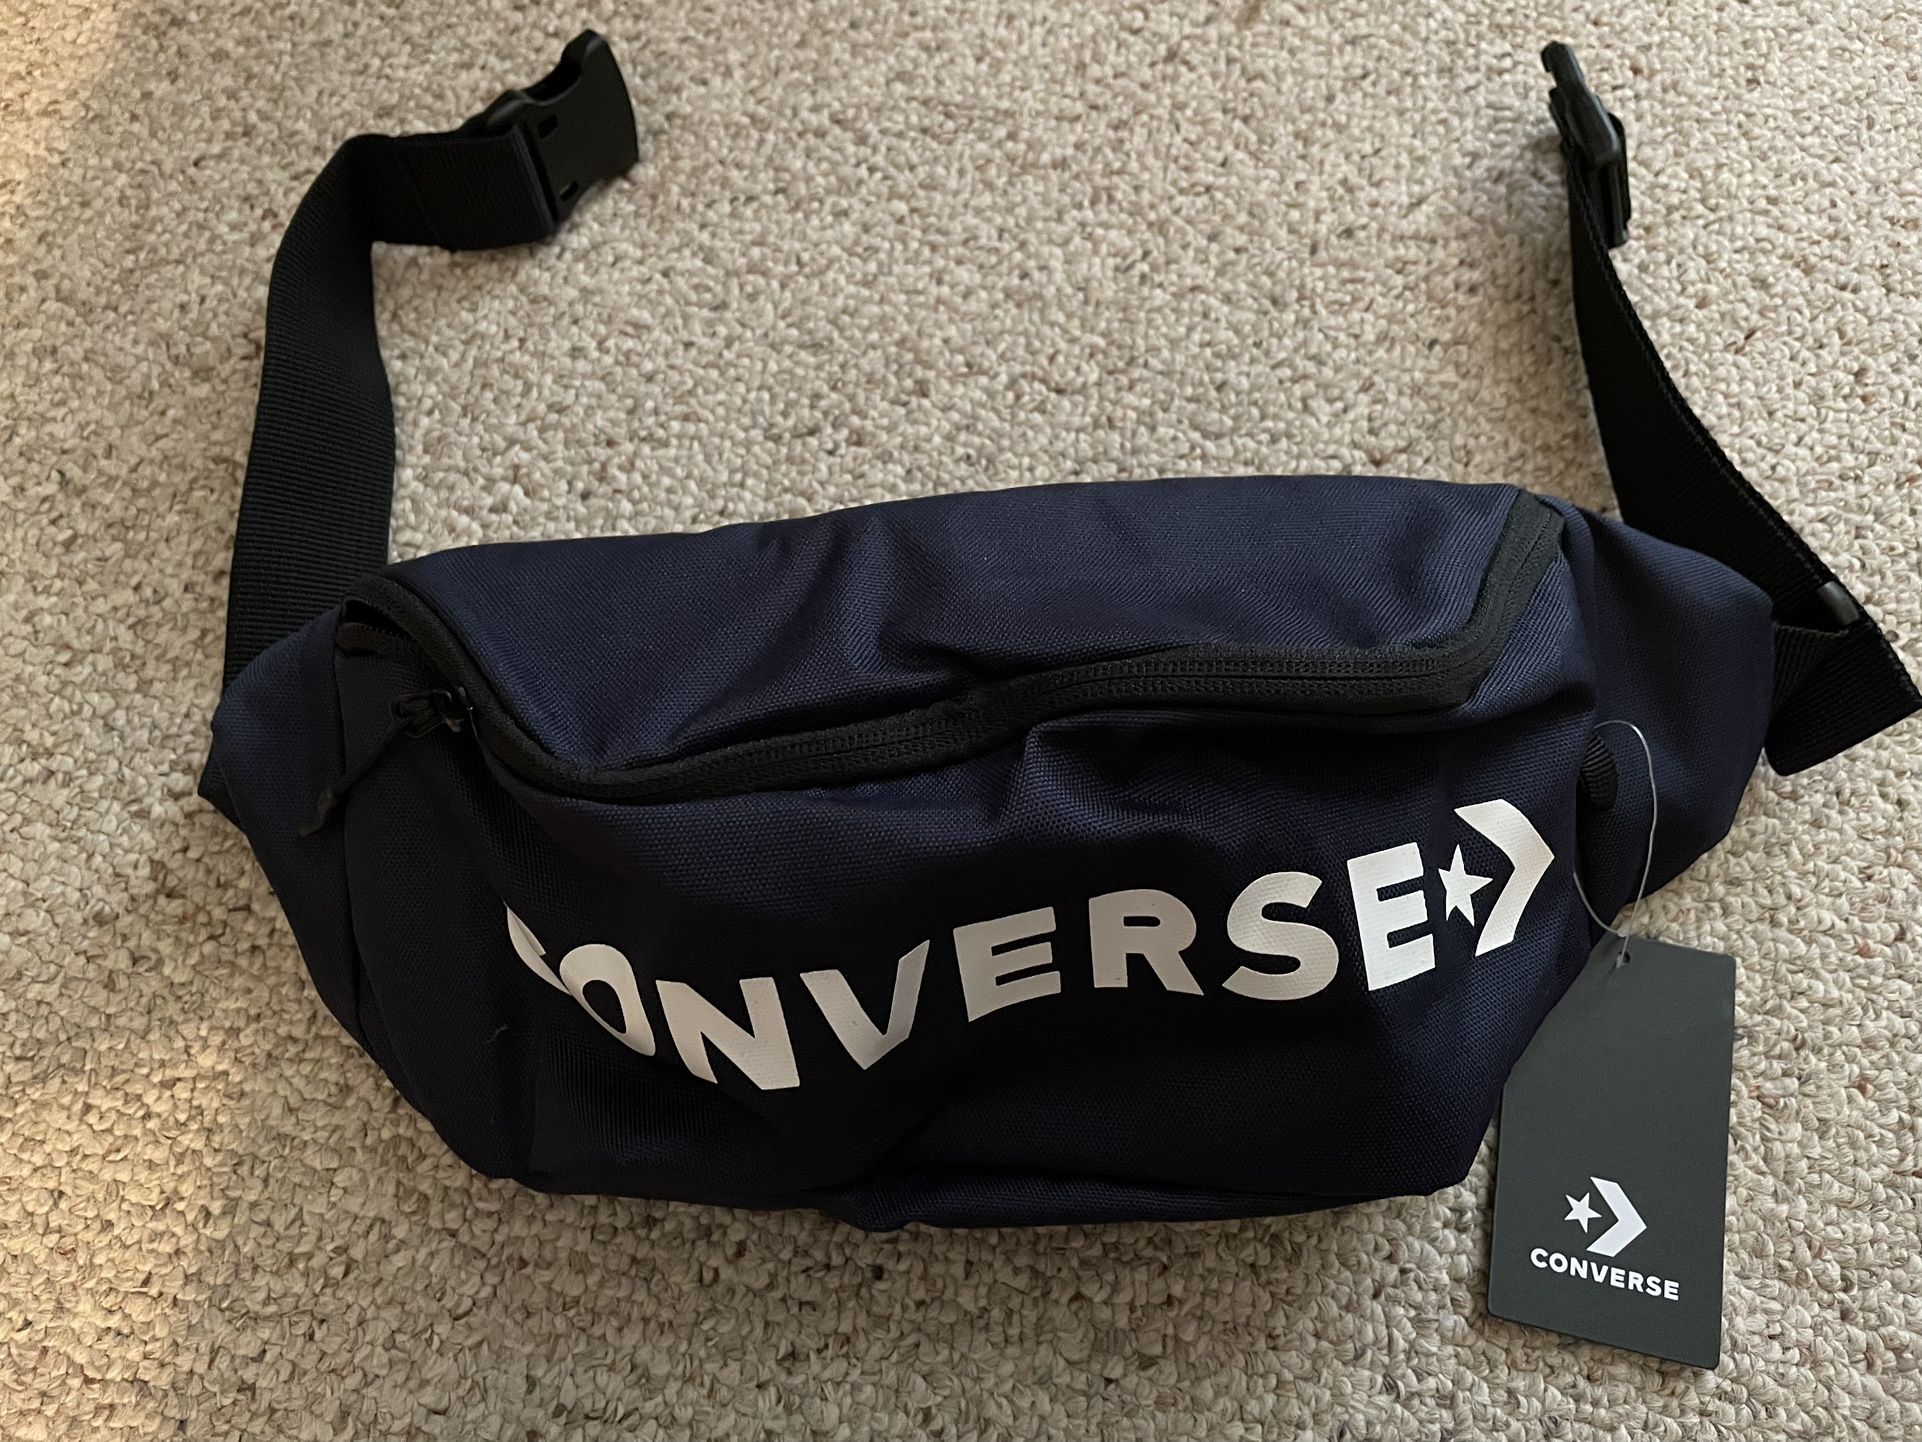 New Converse Fanny Pack - Men’s Large